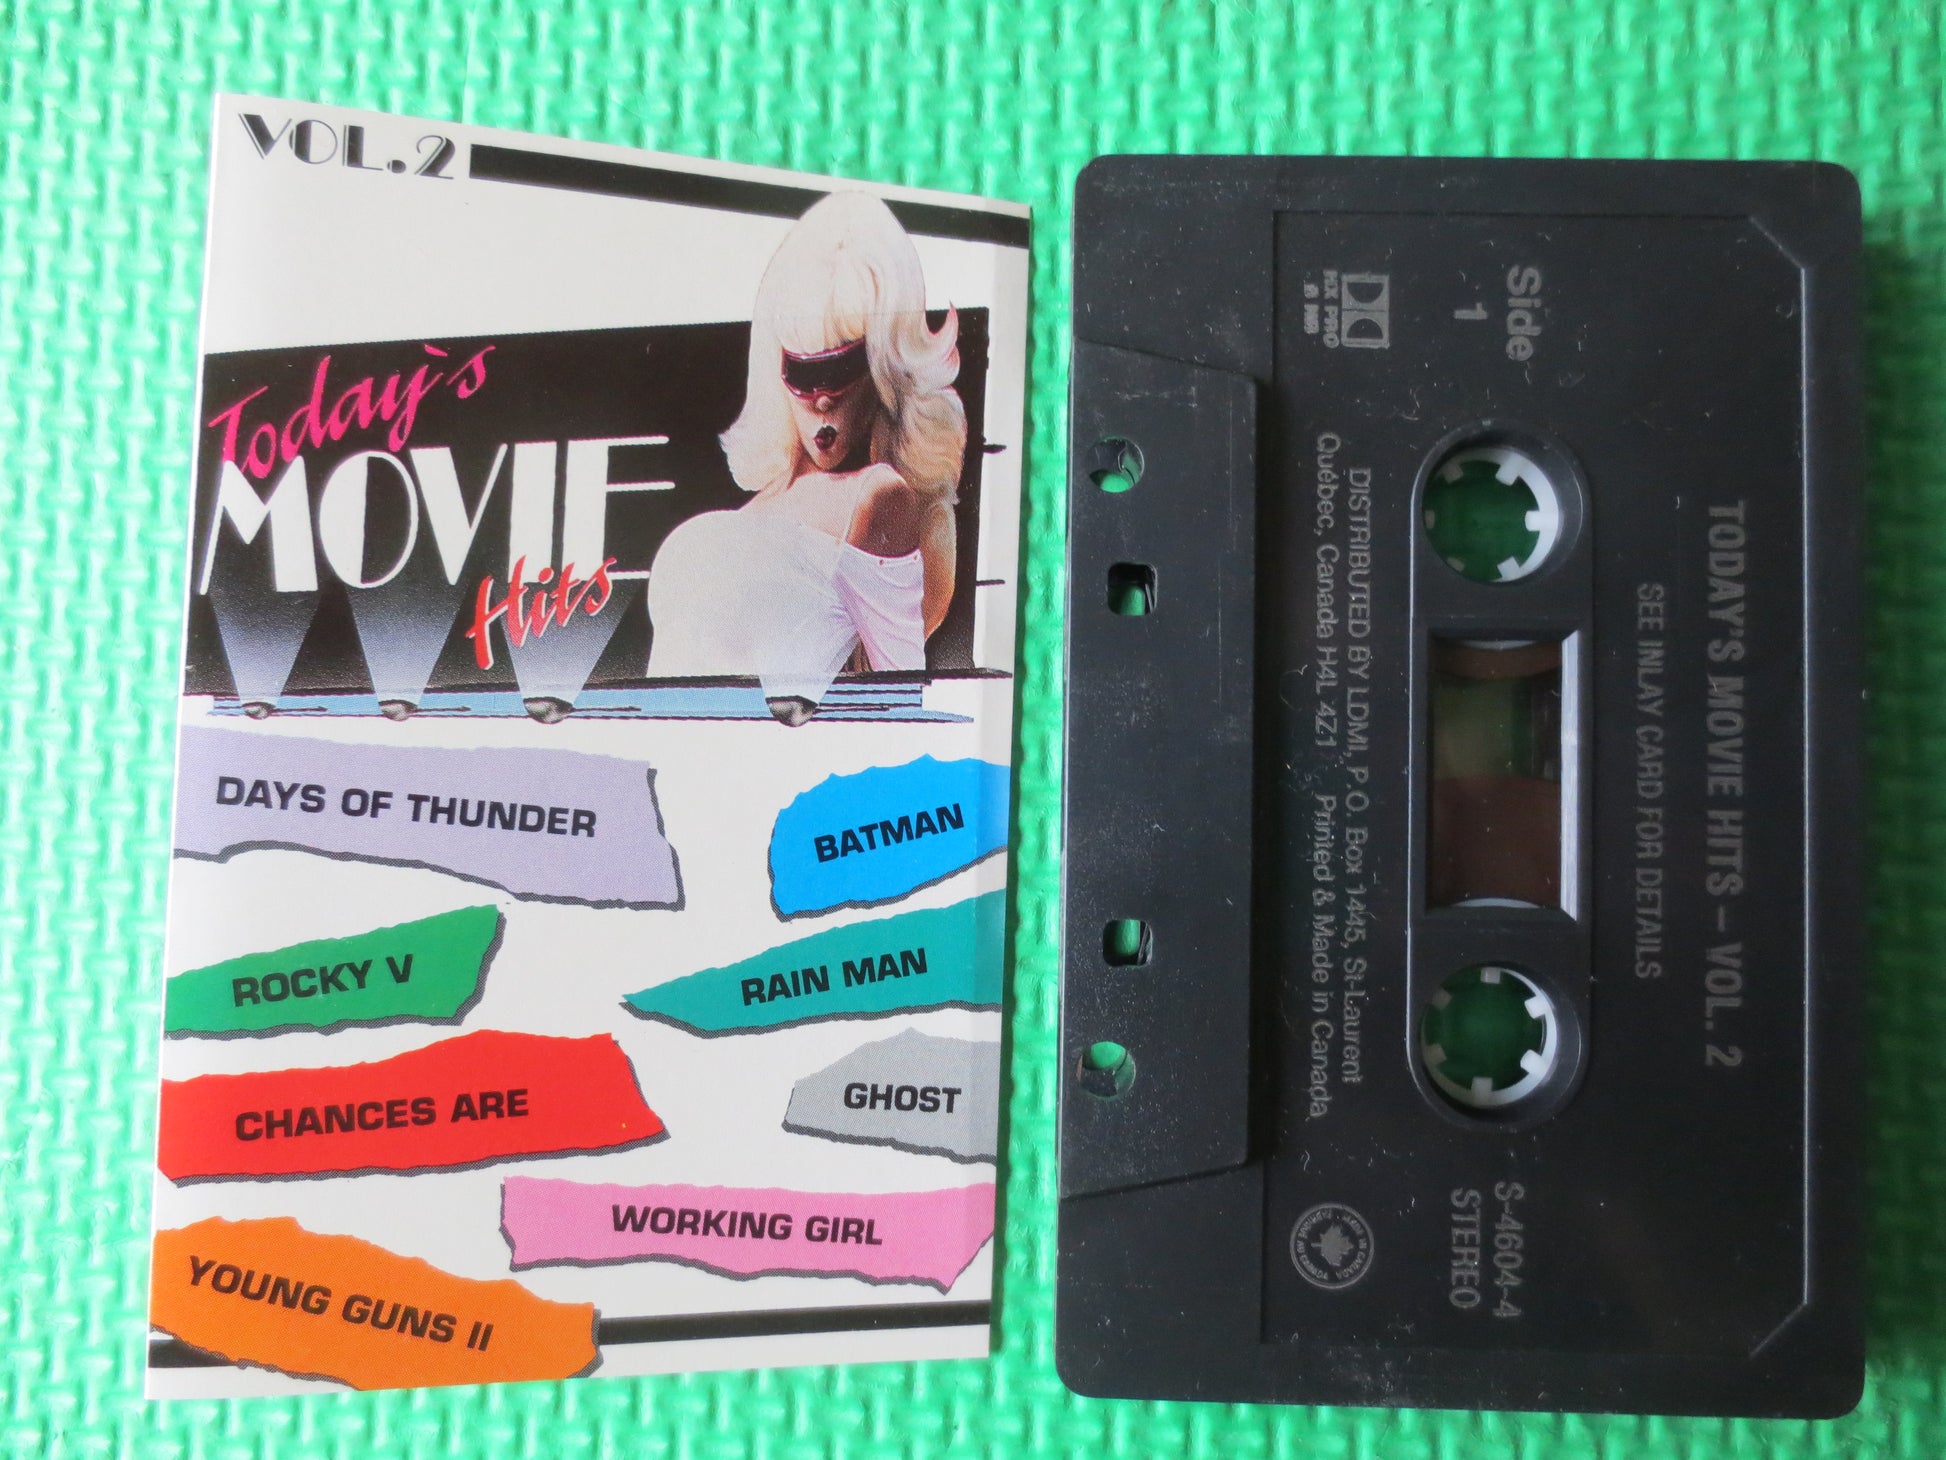 Today's MOVIE HITS, Volume 2, MOVIE Songs, Soundtrack Tapes, Tape Cass – Vintage  Record Store